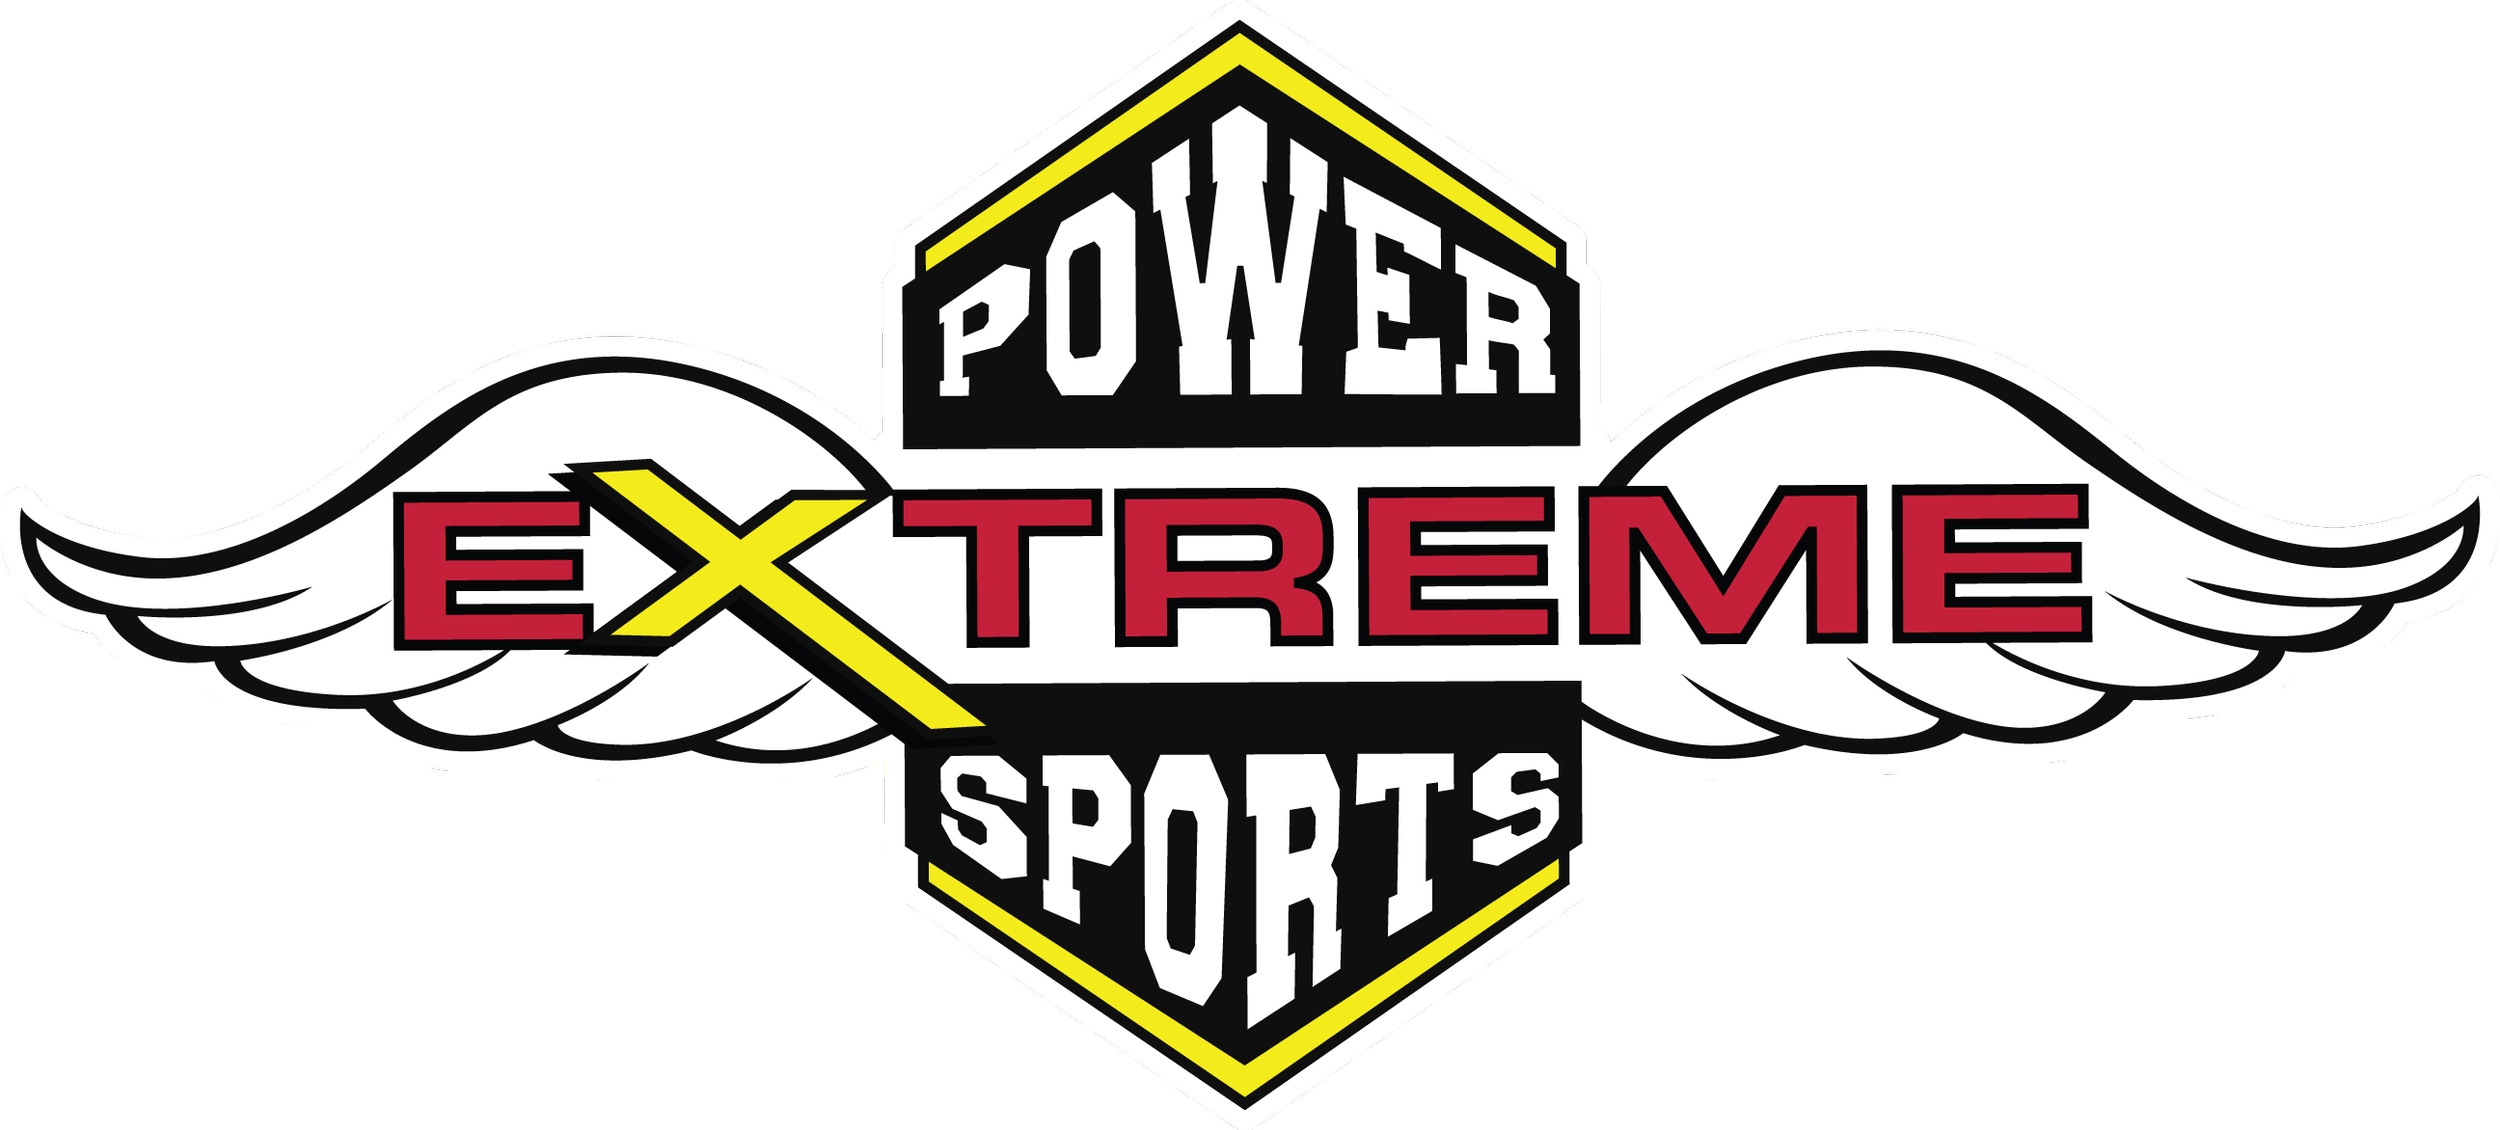 extreme power sports logo.png